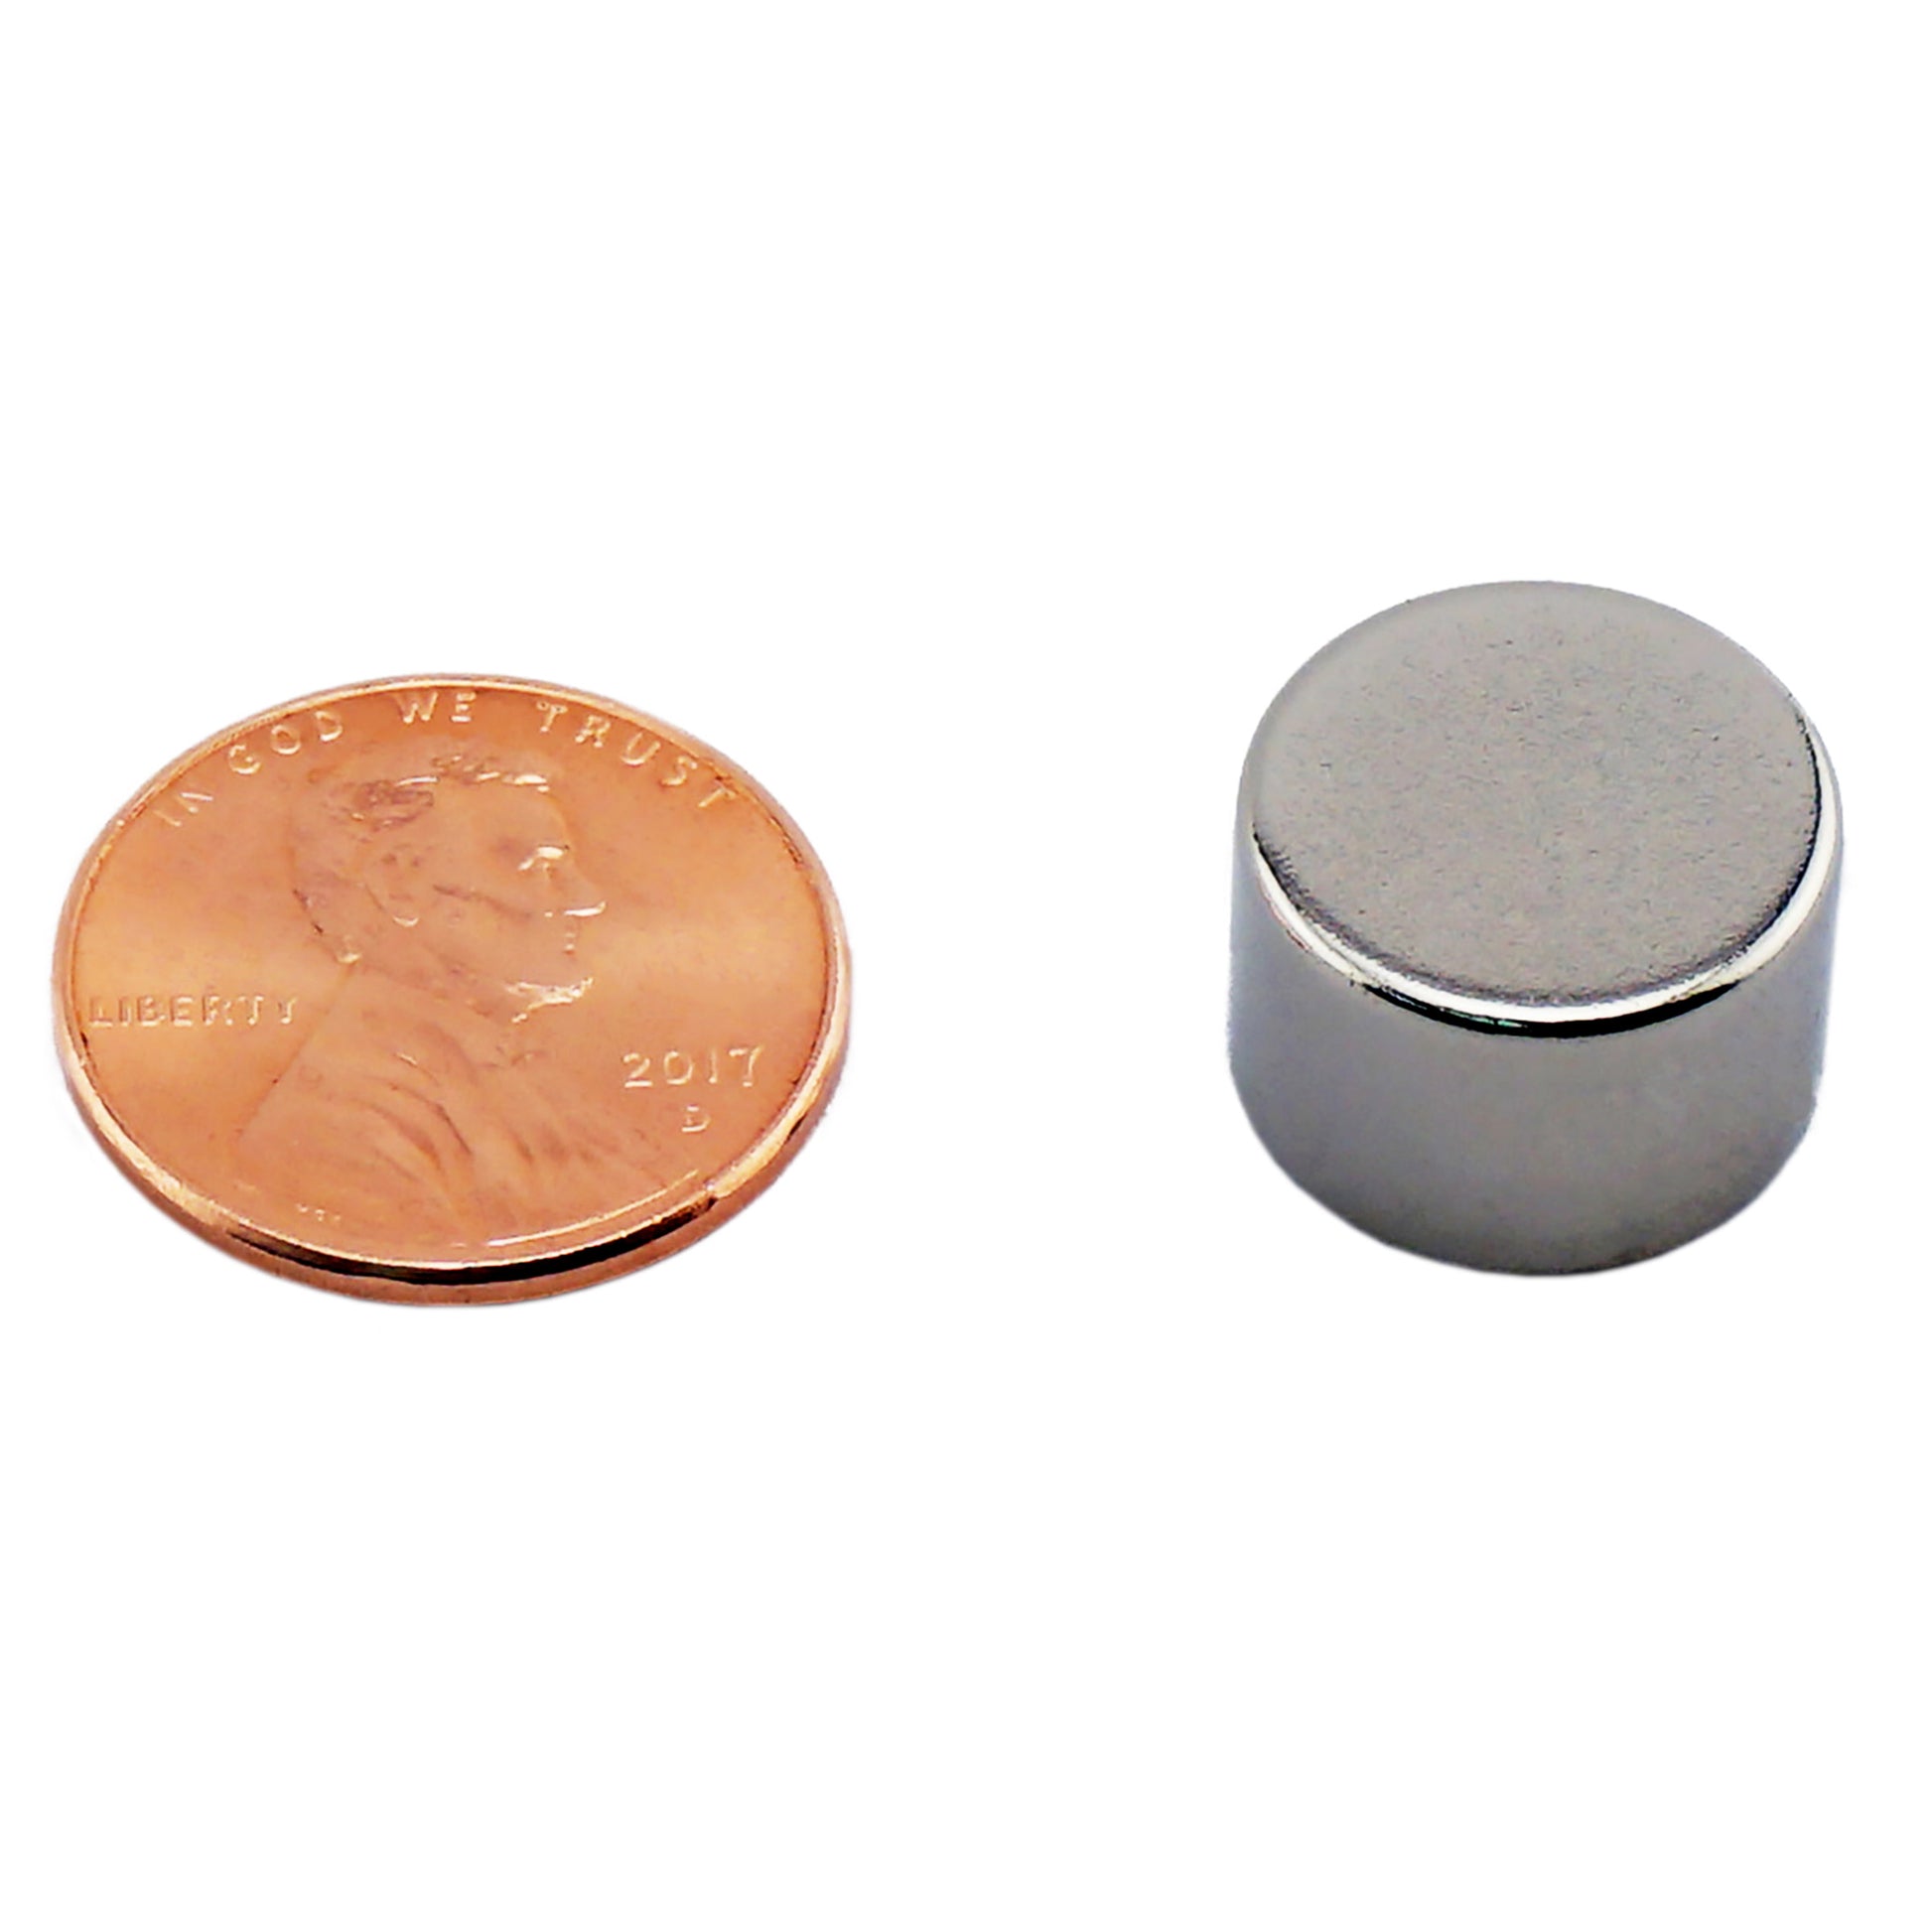 Load image into Gallery viewer, ND005600N Neodymium Disc Magnet - Compared to Penny for Size Reference